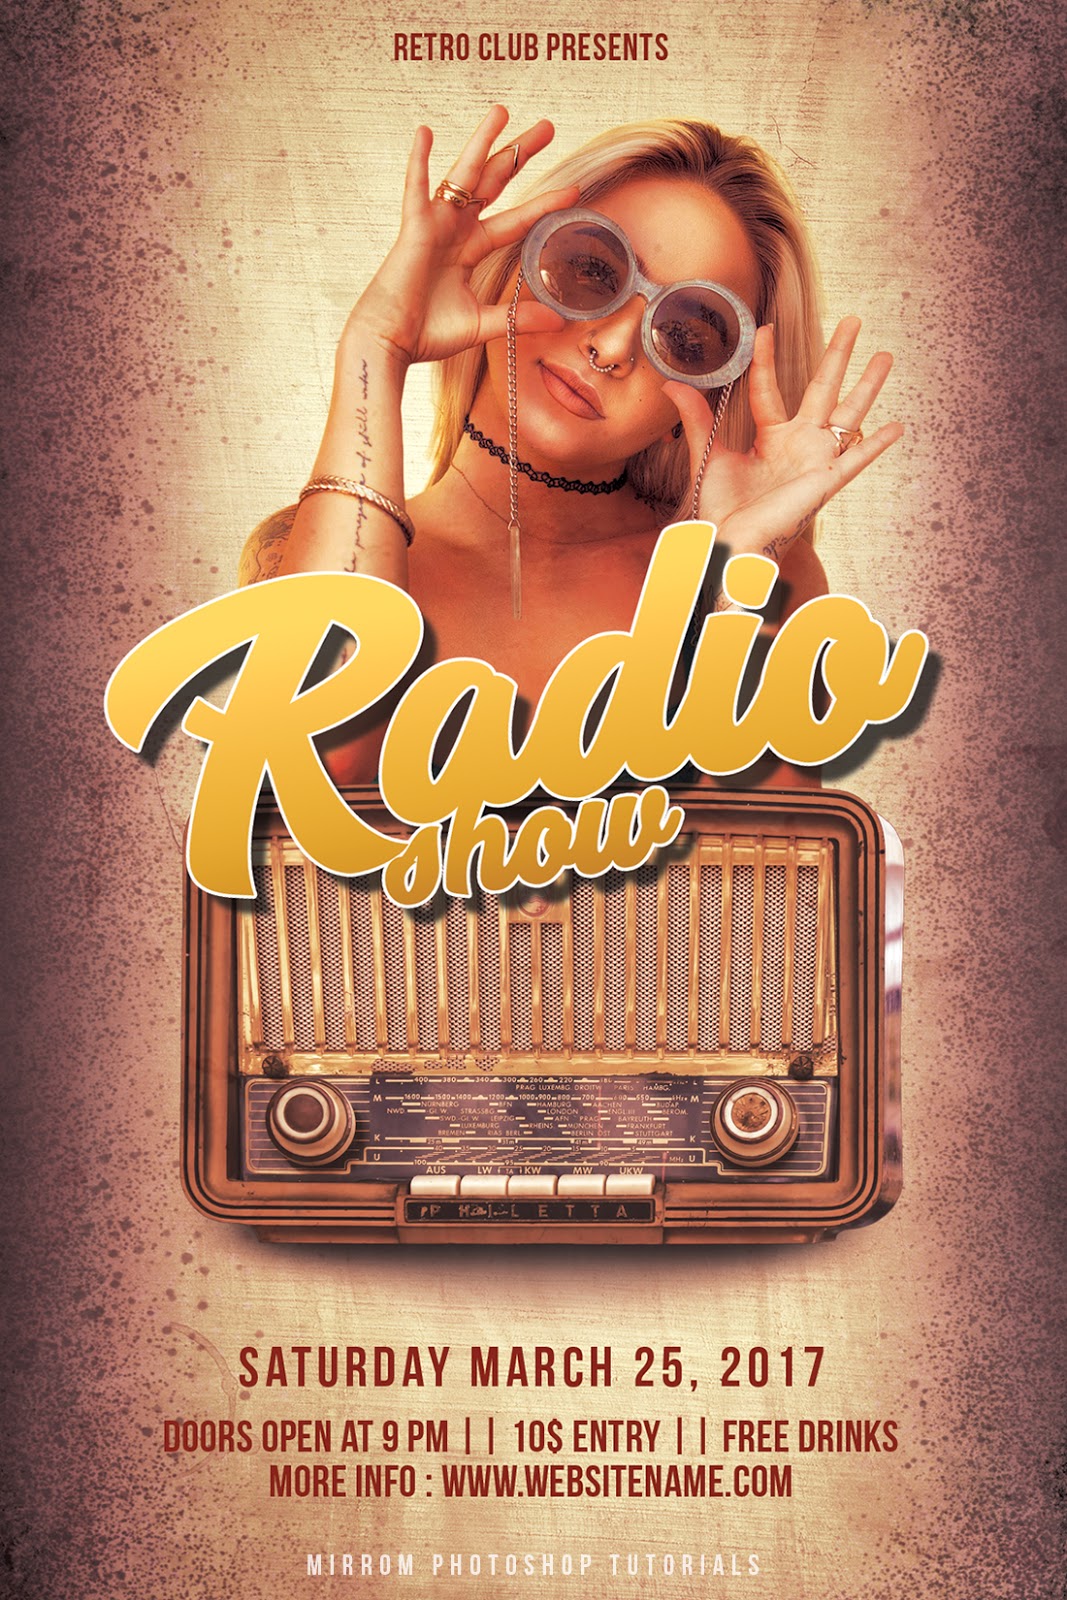 Create a Retro Style Radio Show Flyer In Photoshop